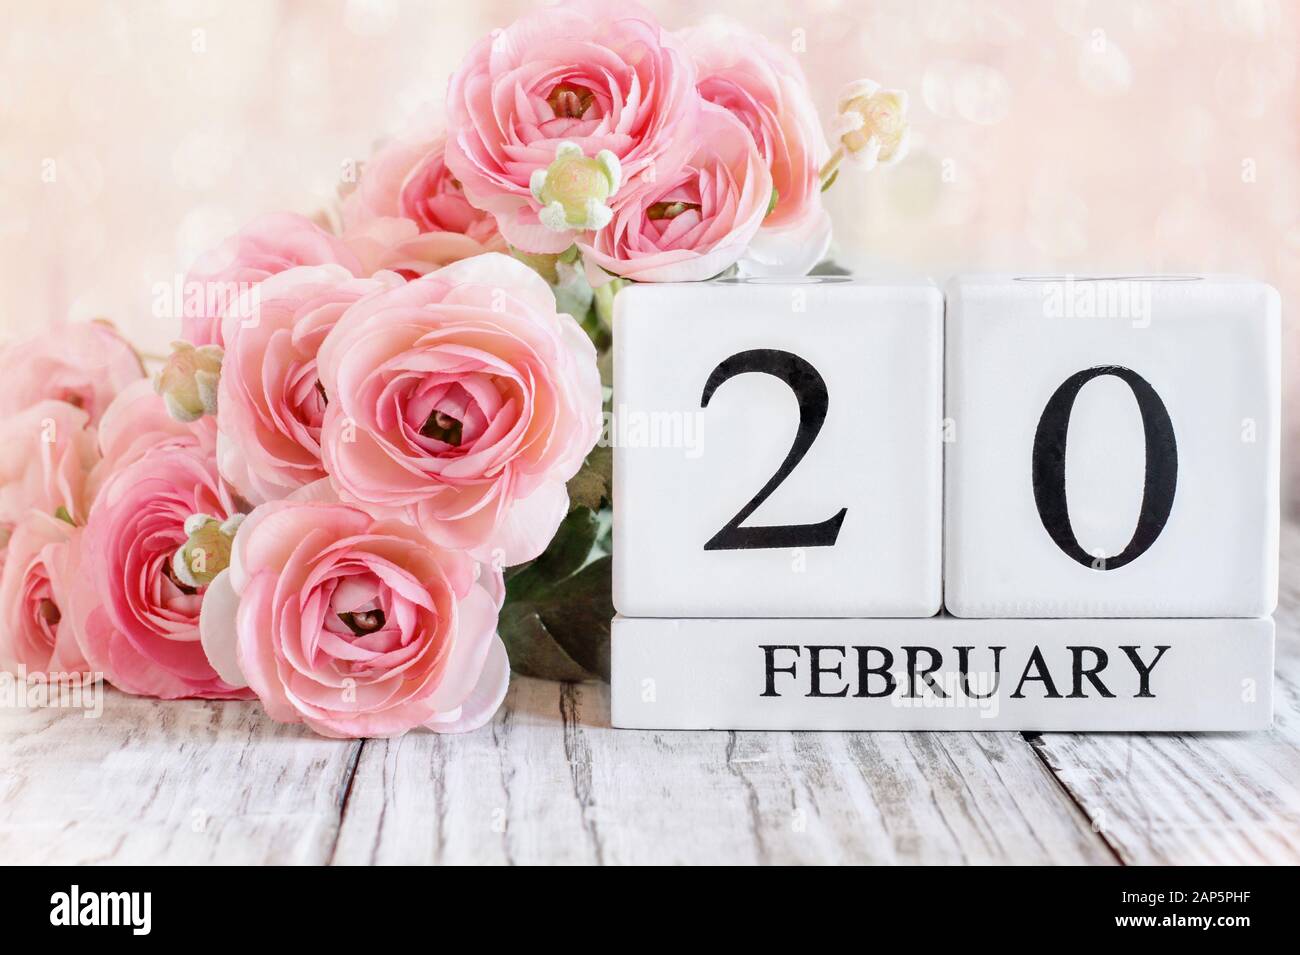 White wood calendar blocks with the date February 20th and pink ranunculus flowers over a wooden table. Selective focus with blurred background. Stock Photo